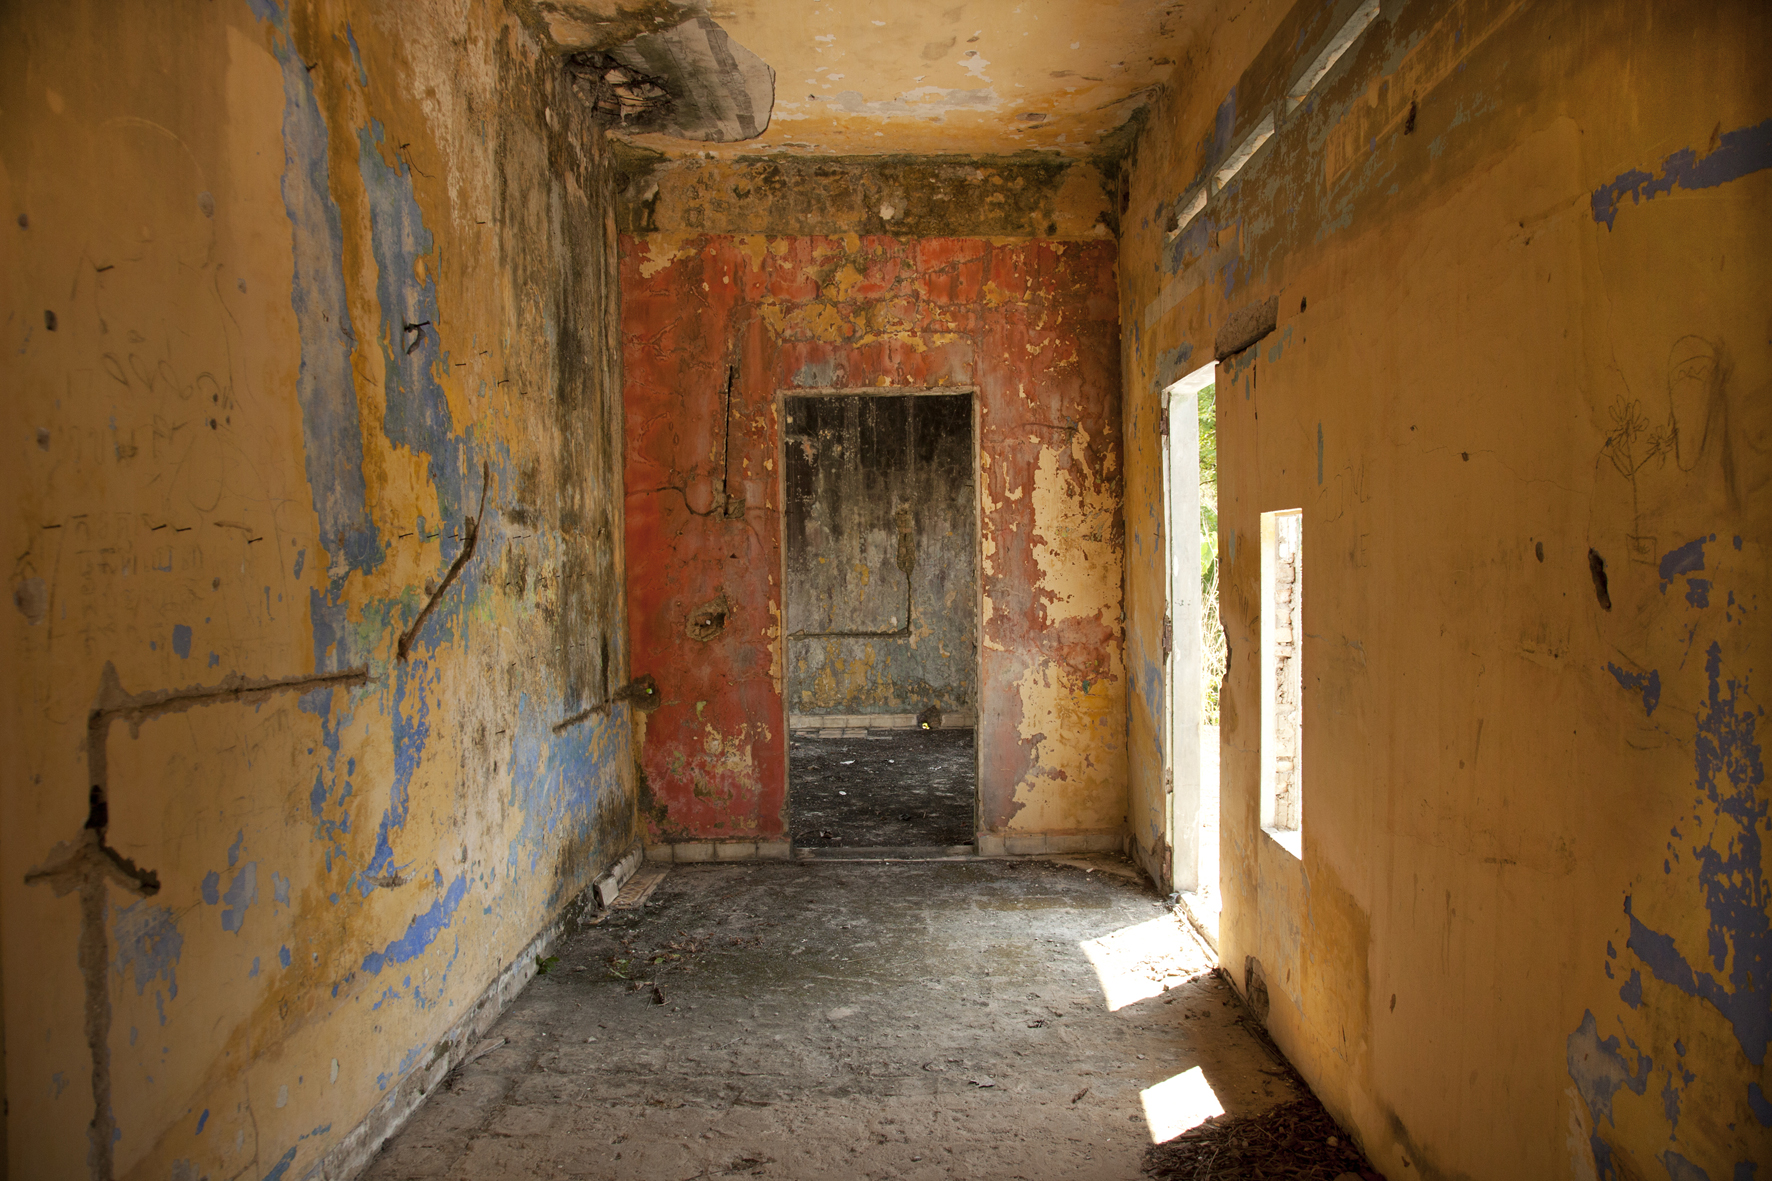 A photograph of an interior space with peeling, cracked wall paint and de-tiled floors. The wall paint is a warm yellow, with swashes of red and blue. On the furthest wall is an entryway leading to another room. On the left wall is another entryway that leads outside and a window. Sunlight is casting into the interior from both the window and entryway.